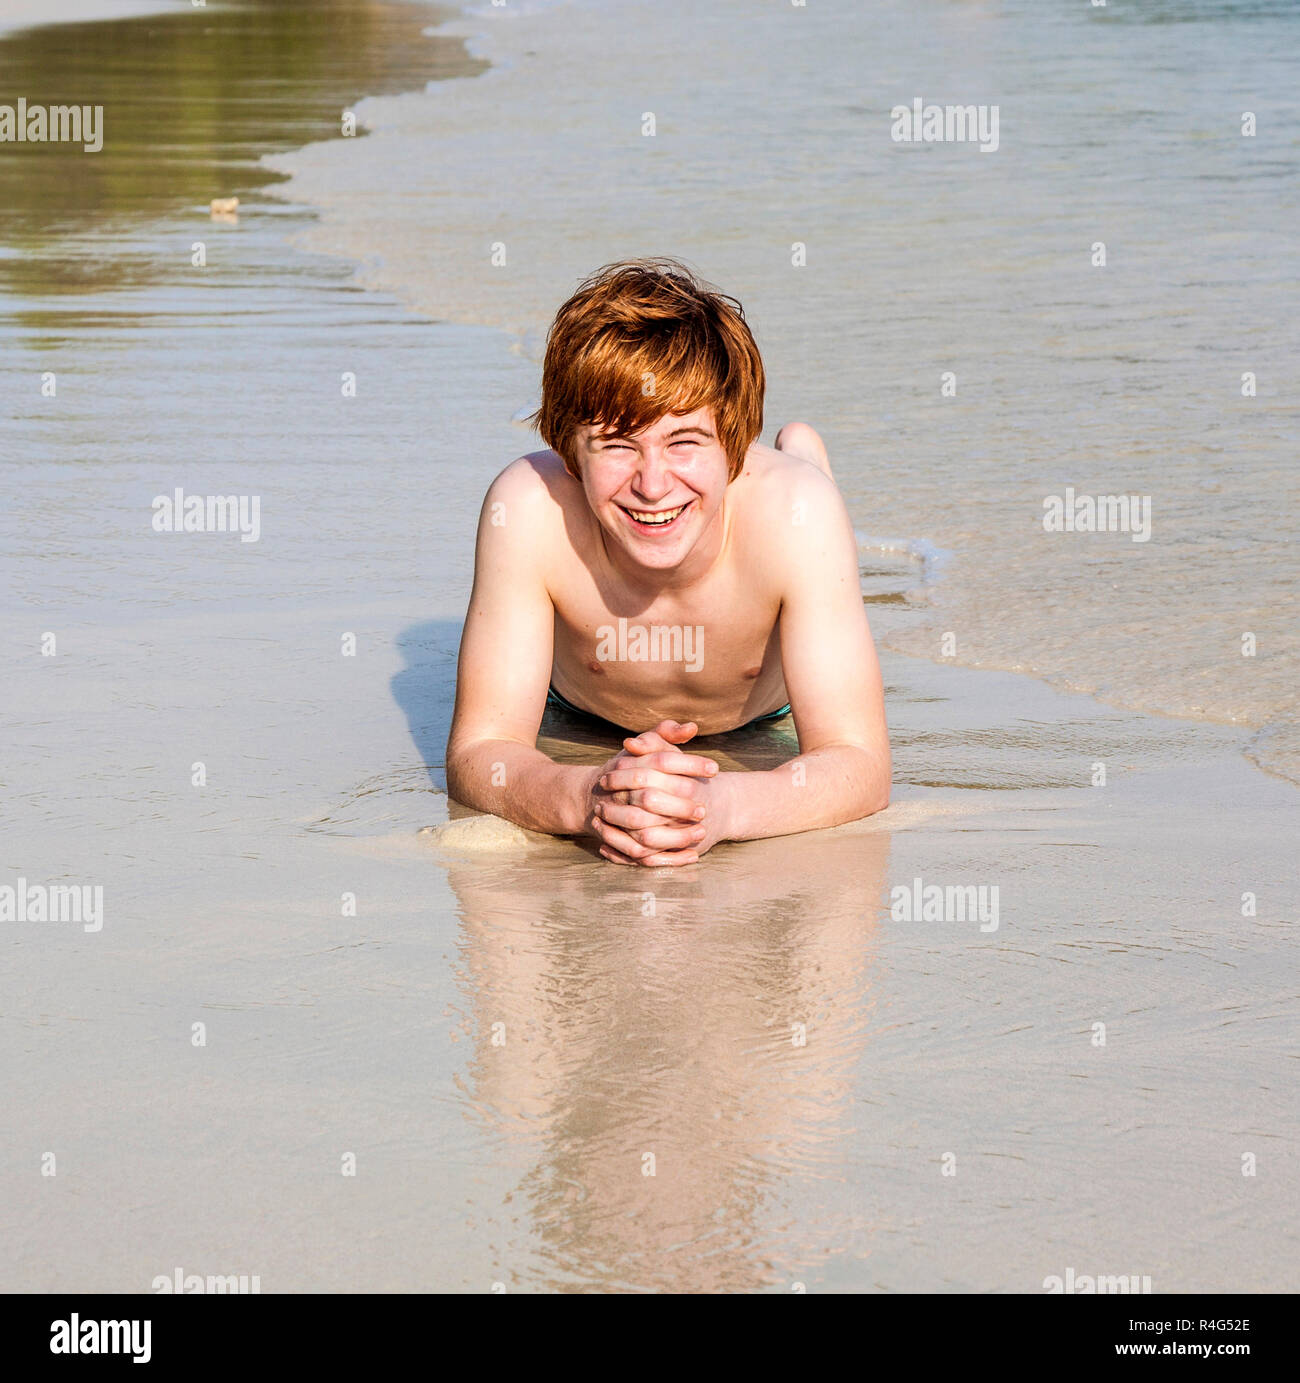 Teen Male Boy Swim Suit High Resolution Stock Photography and Images - Alamy